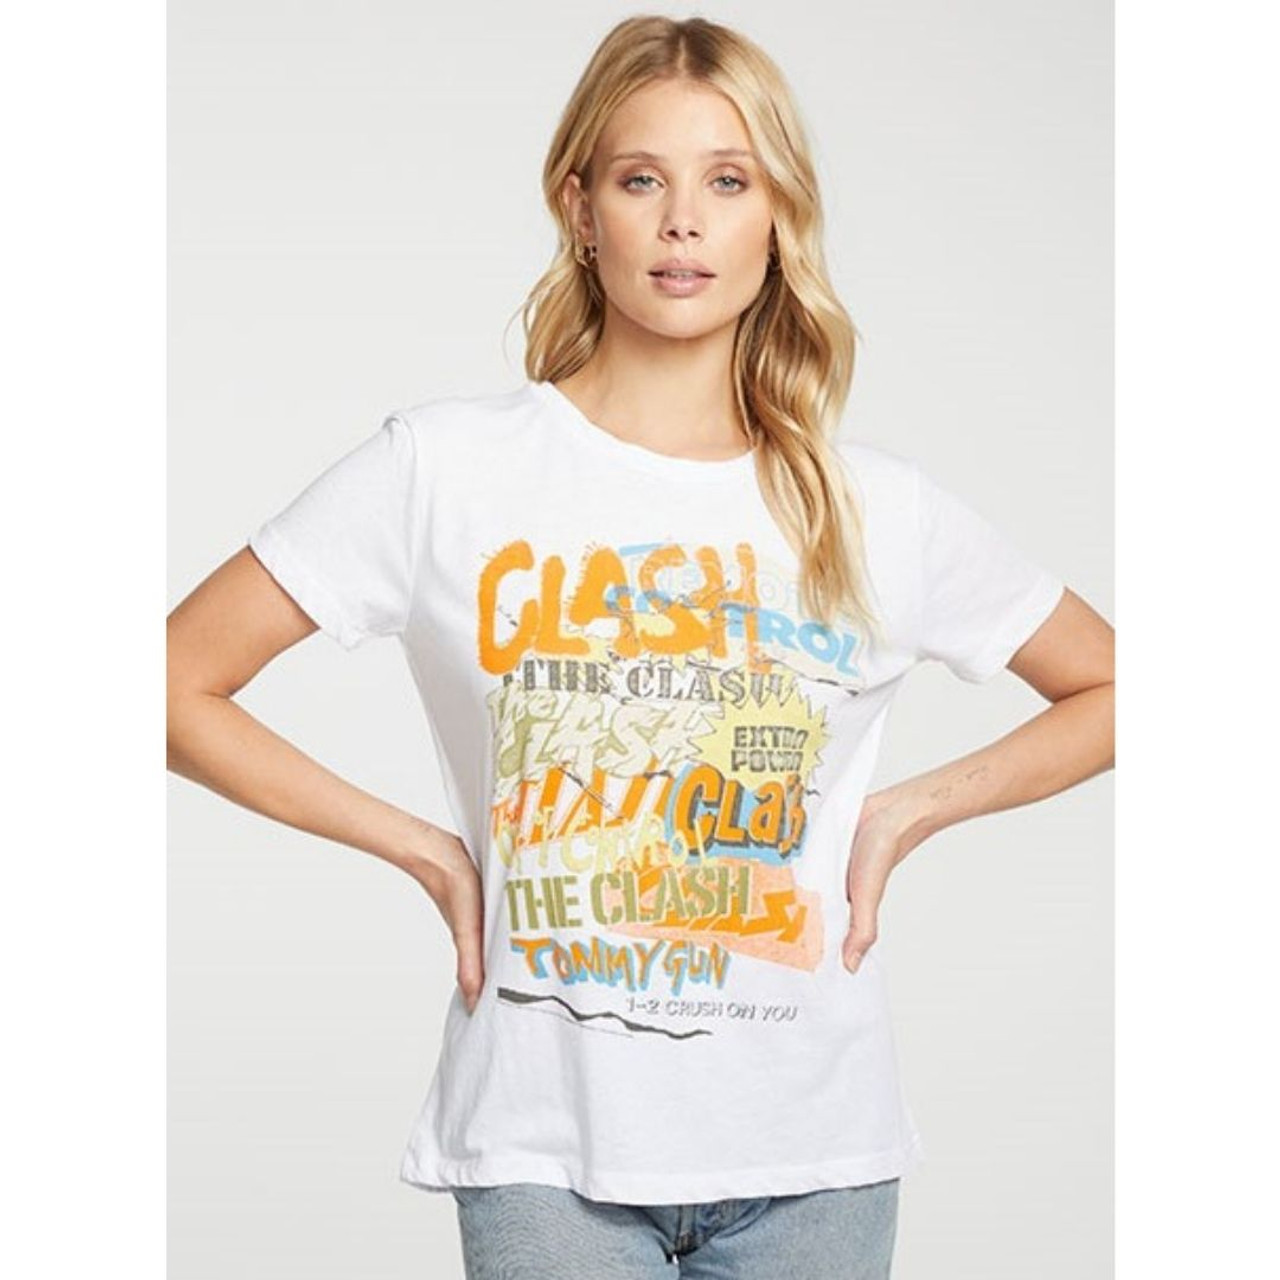 The Clash Vintage T-shirt by Chaser - The Clash Logos and Song Titles | White Shirt - Rocker Rags